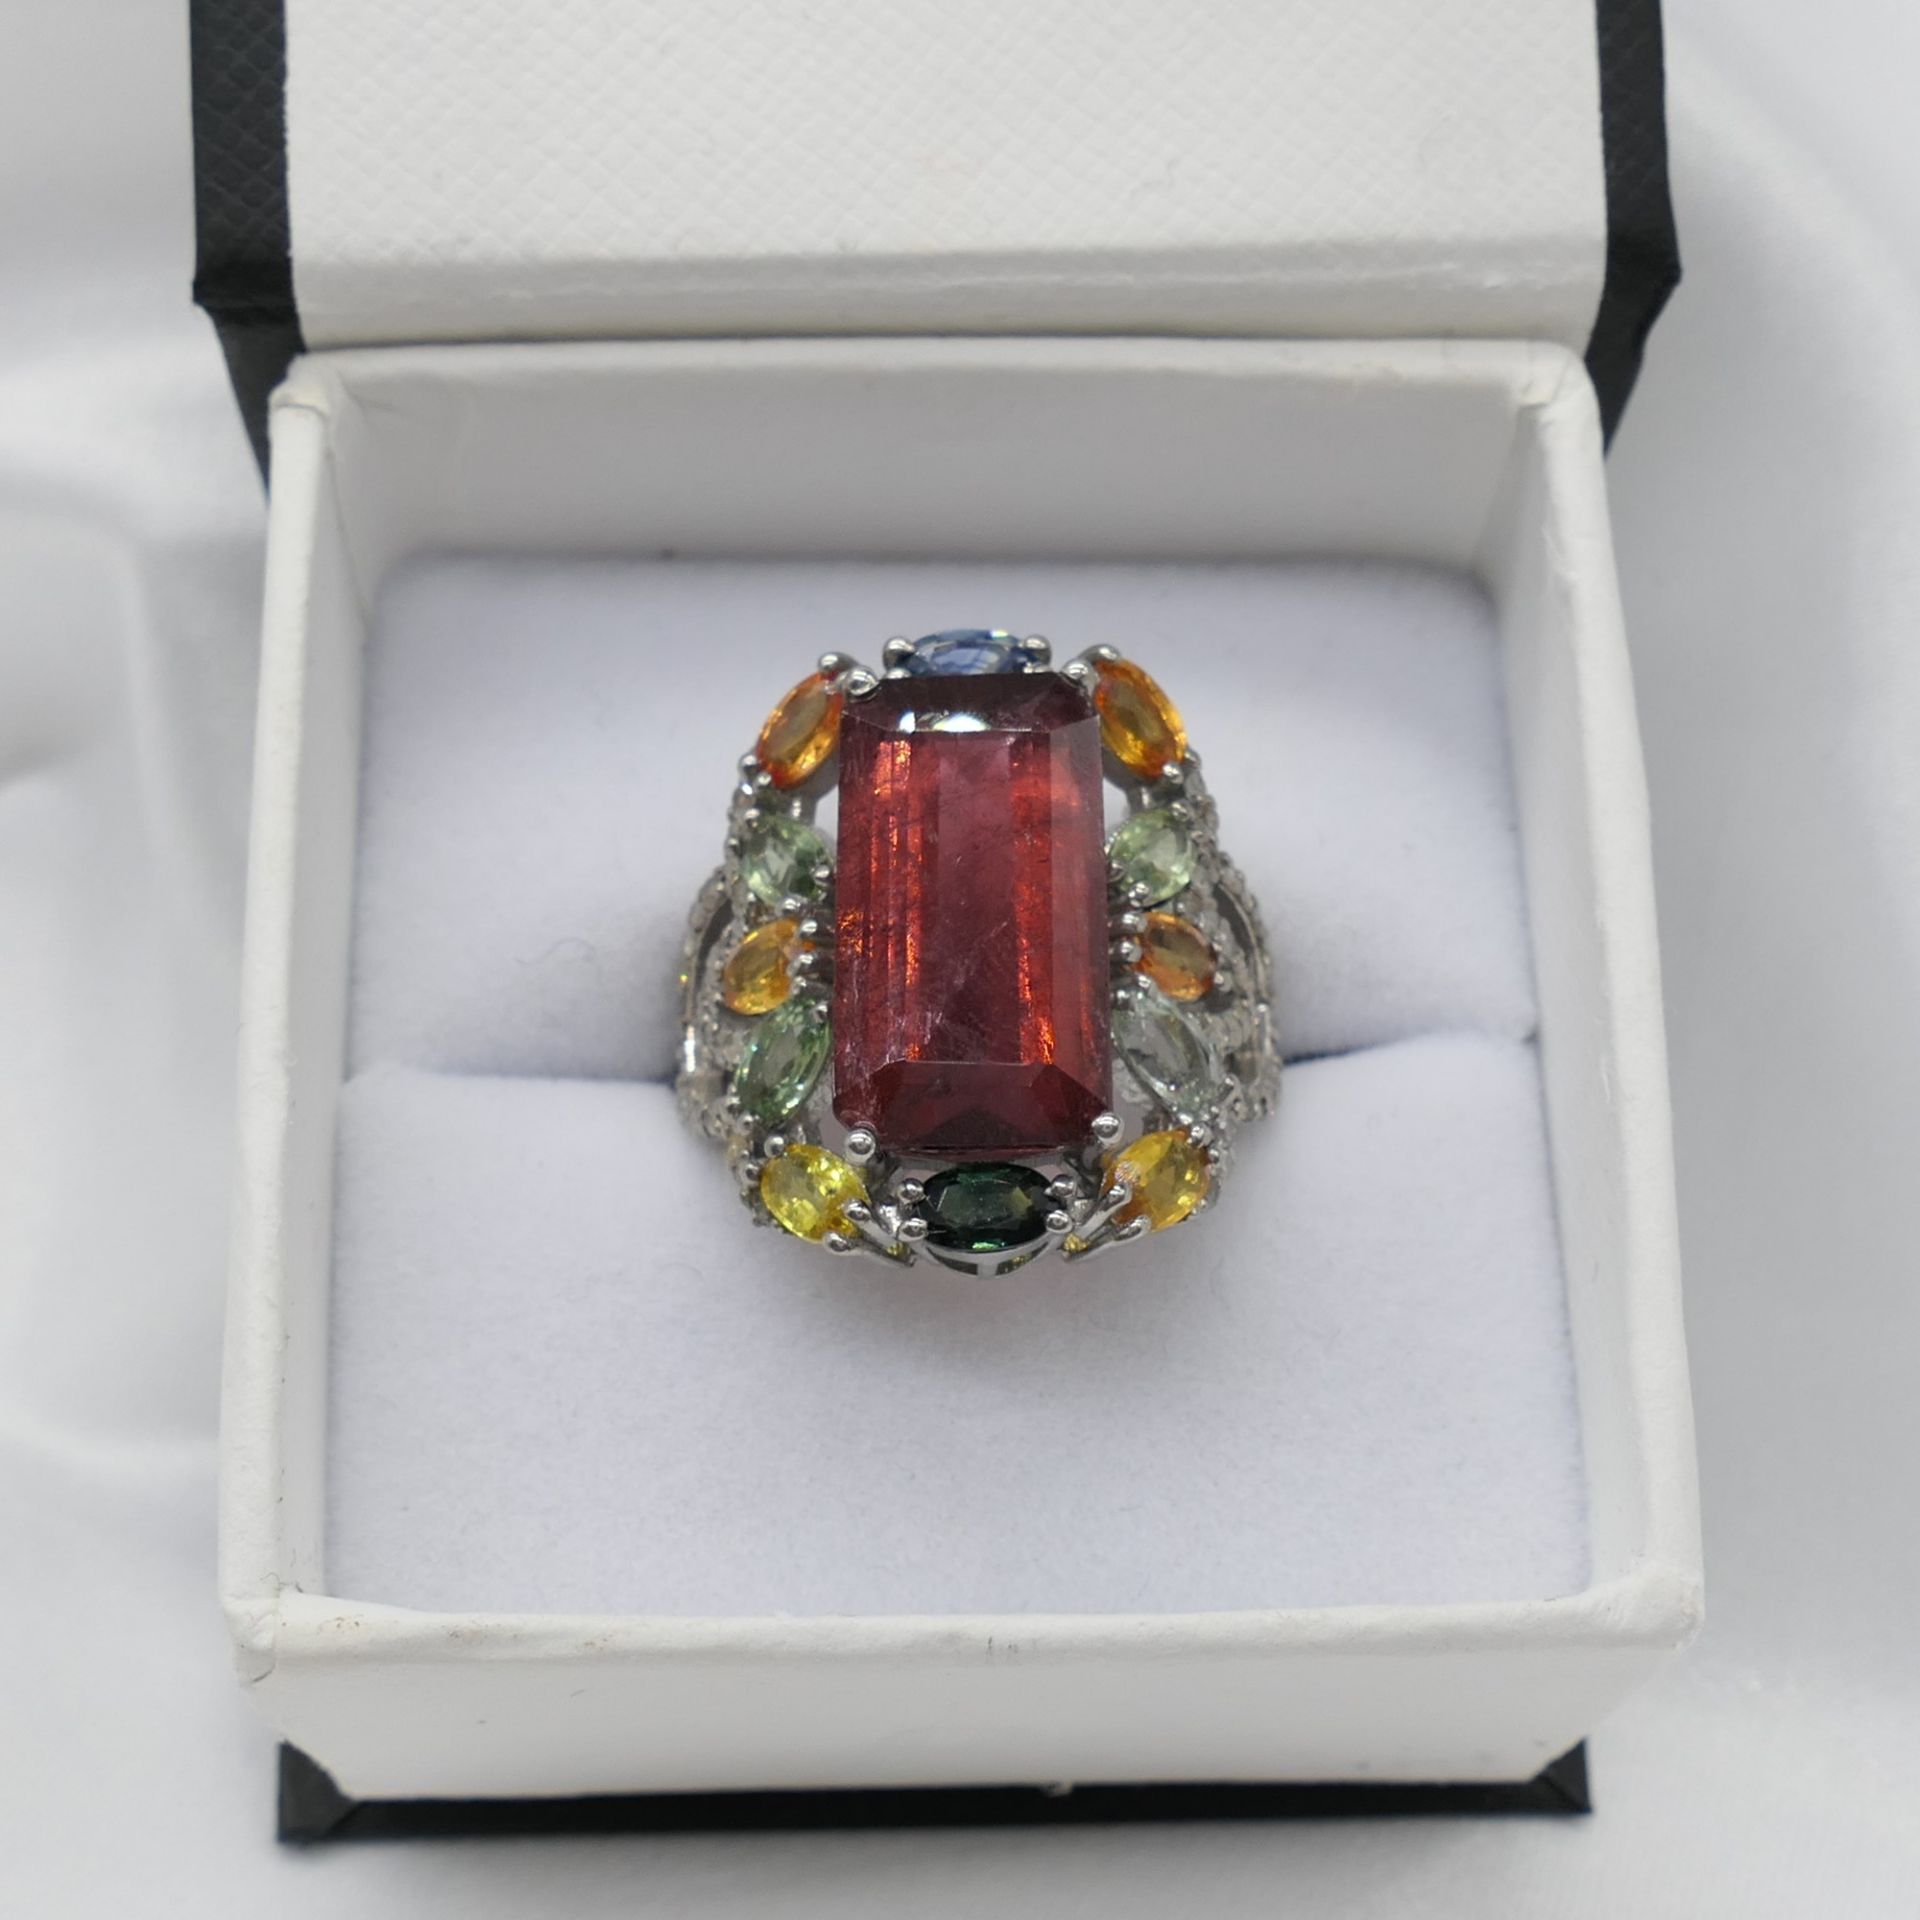 Large Dress Ring Set With Tourmaline, Multi-Coloured Sapphires and Diamonds - Image 6 of 7